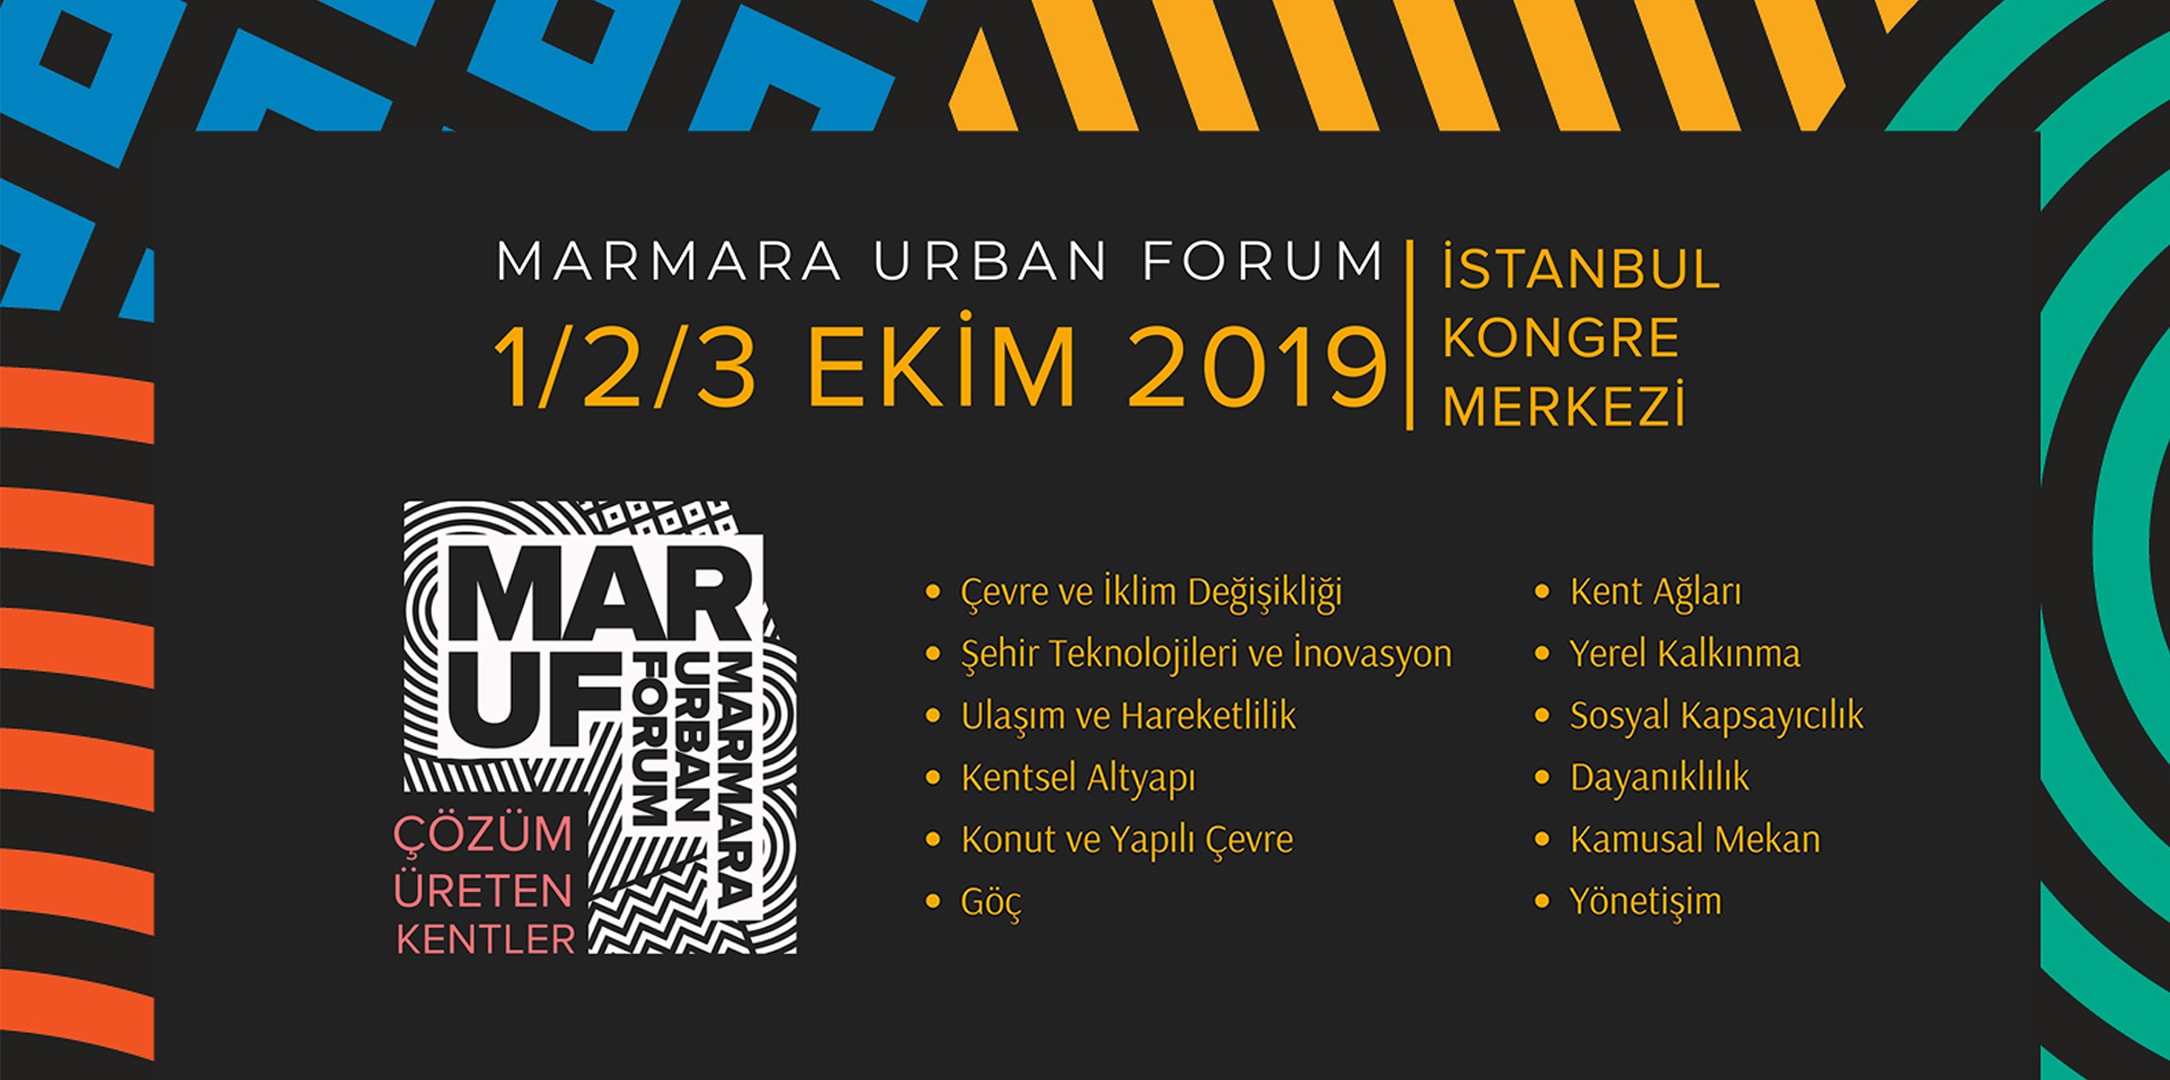 “cities Developing Solutions” Will Meet inIstanbul}